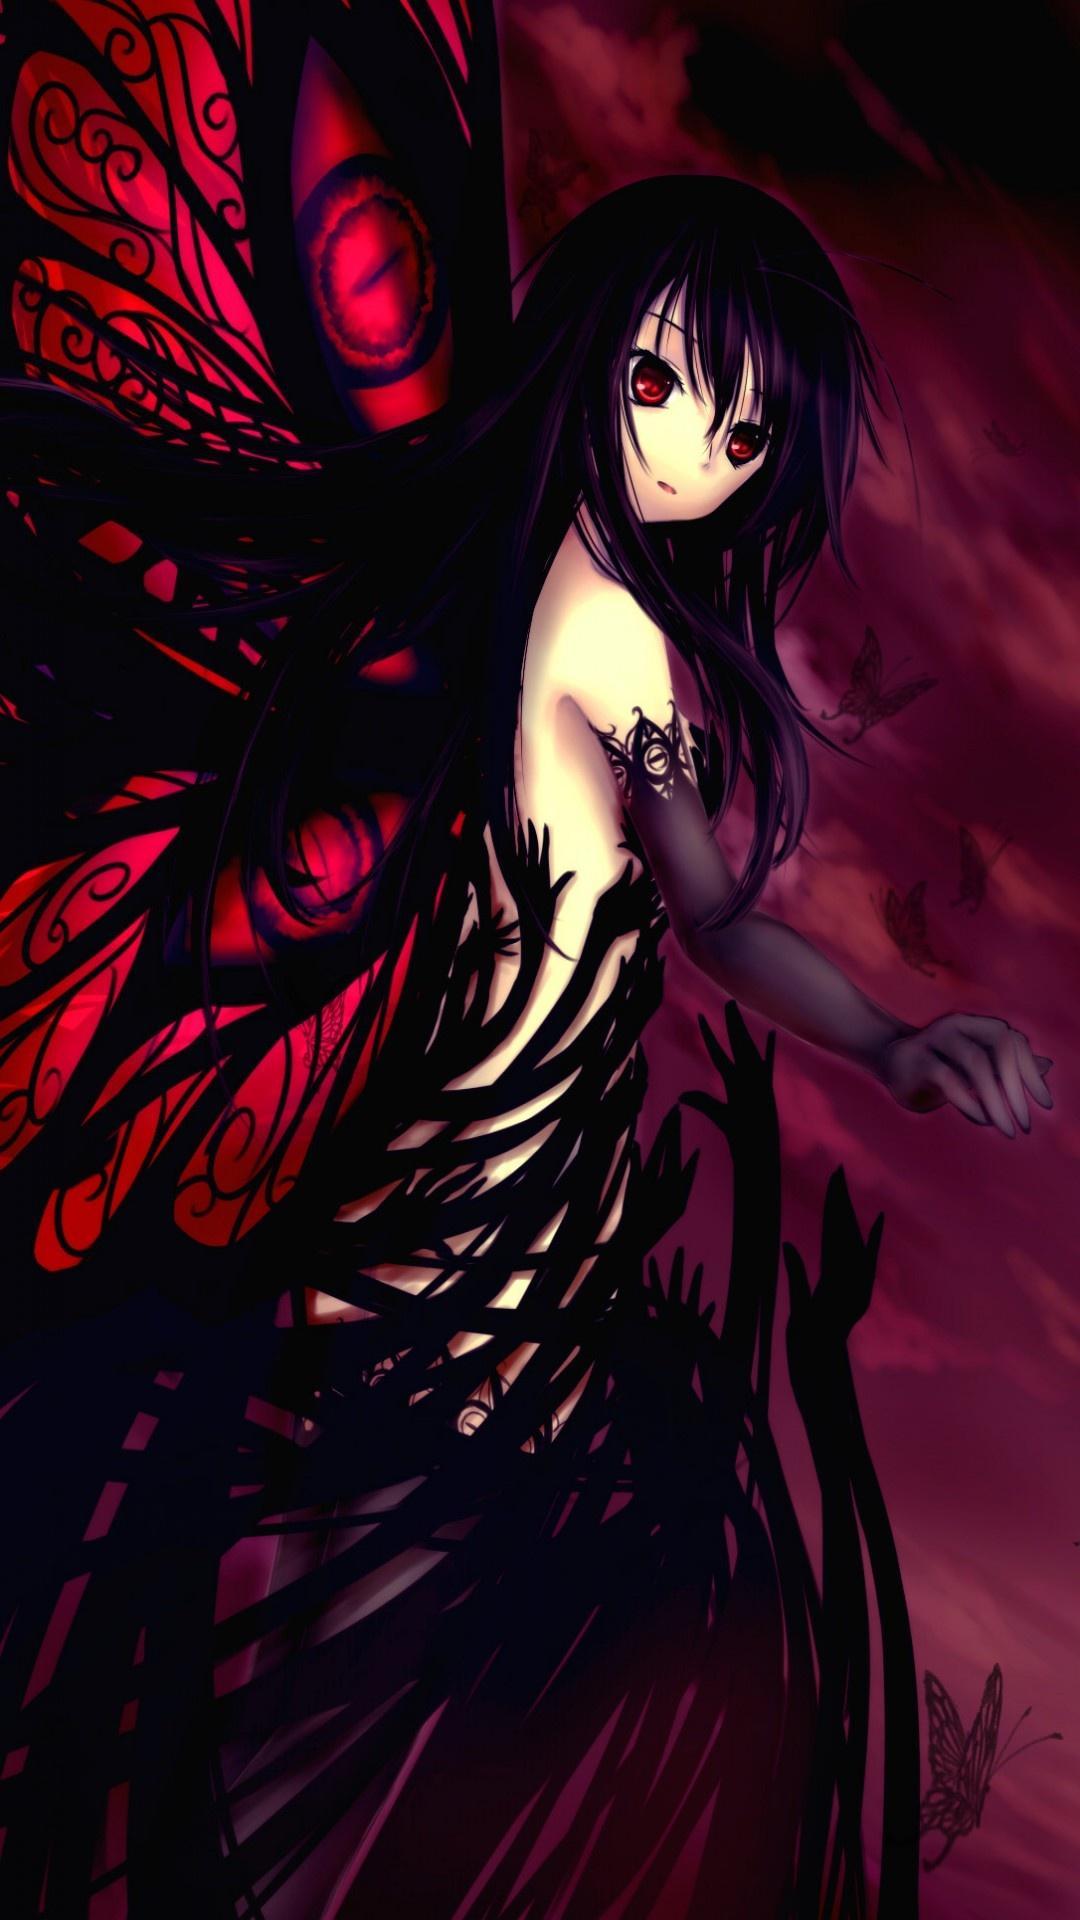 Goth Anime Girl Wallpaper Woop for Android